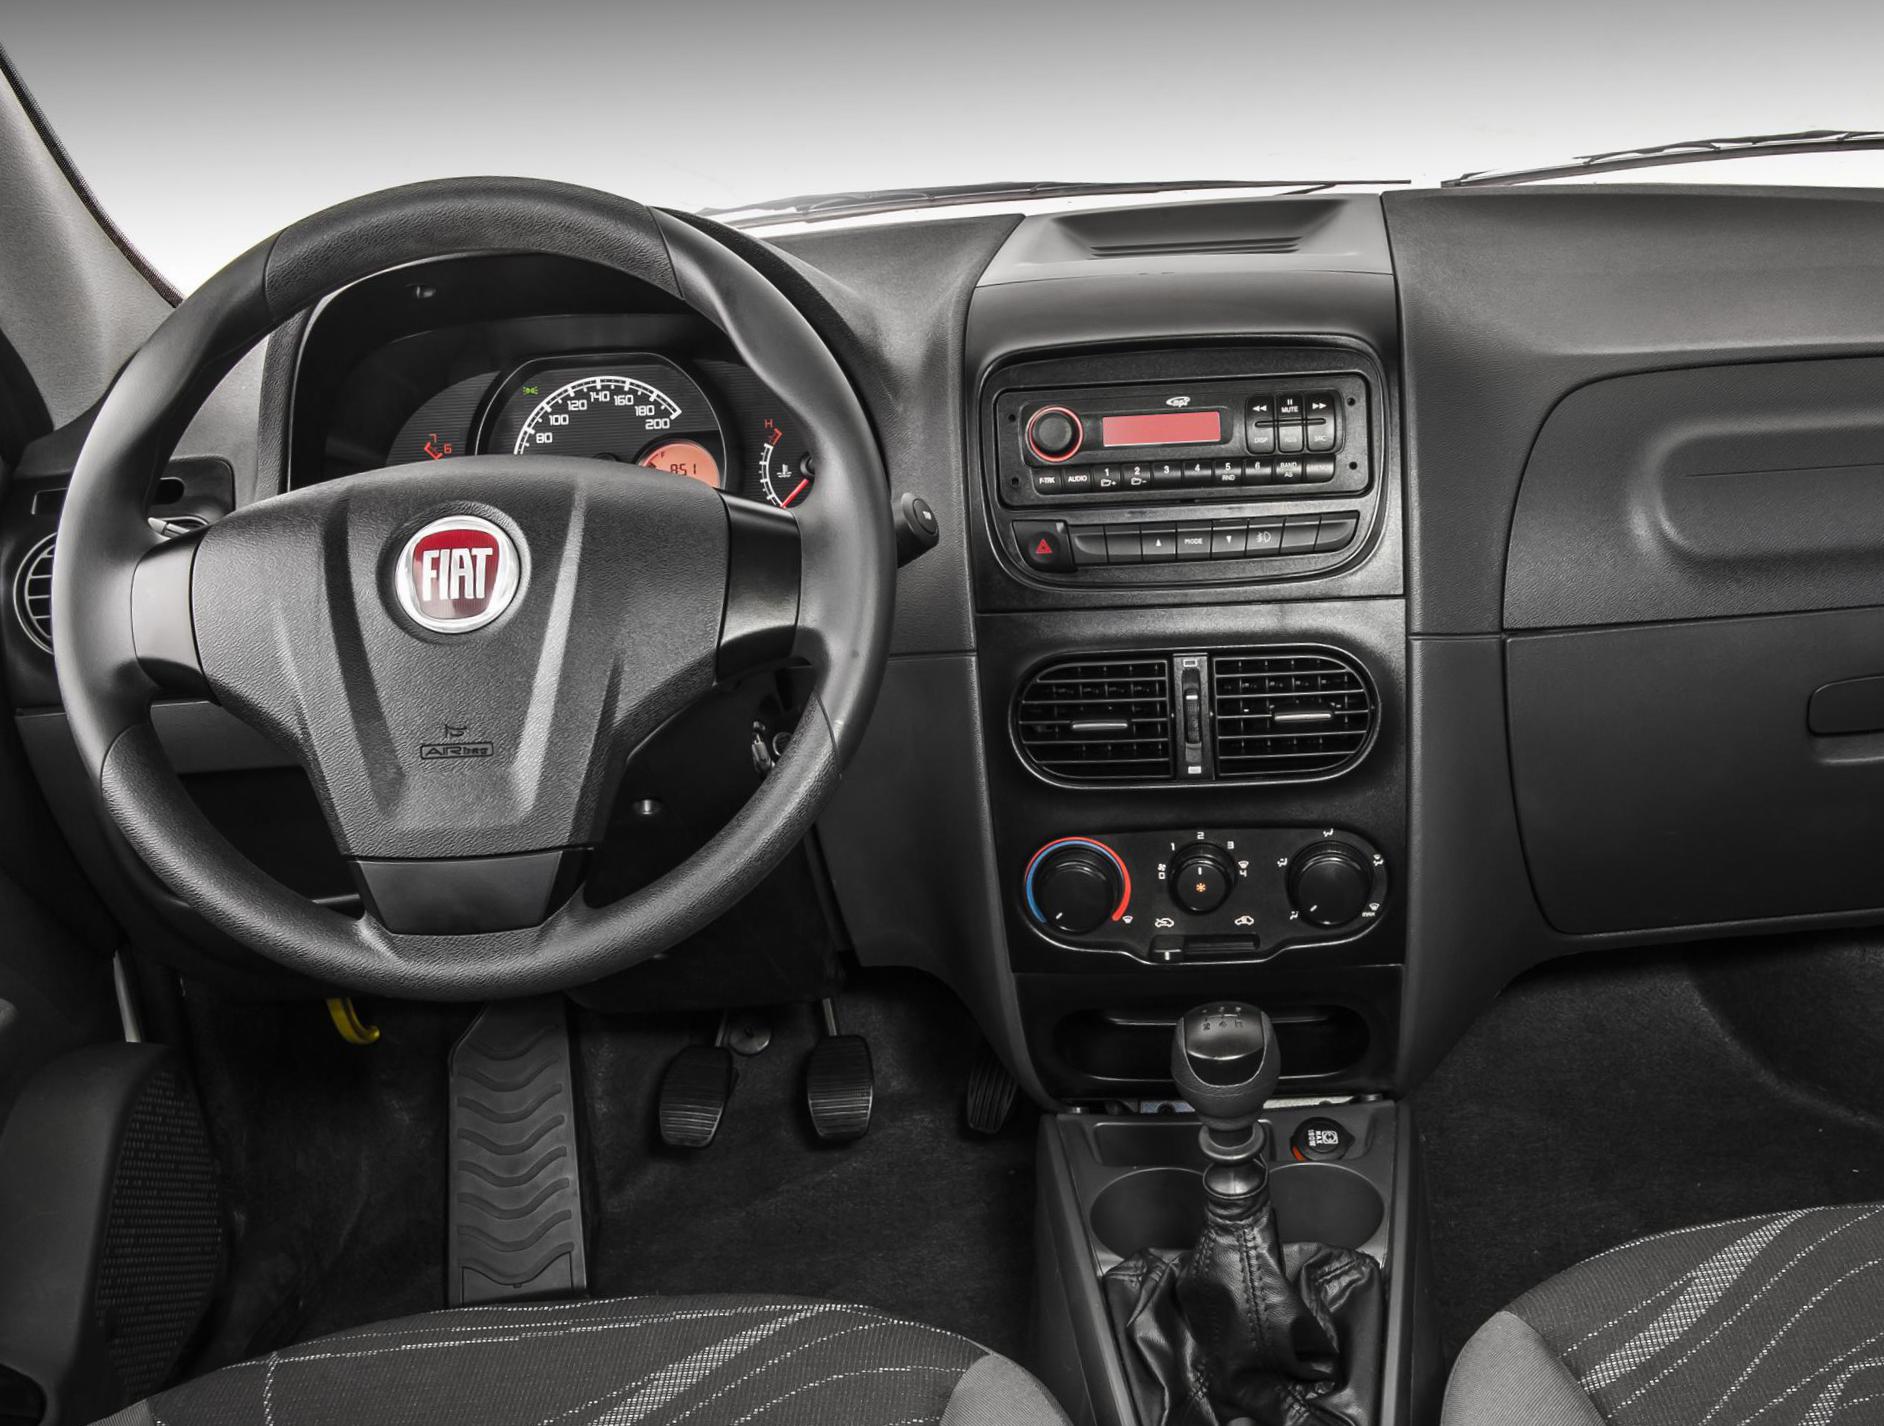 Strada Working CE Fiat Specifications 2014